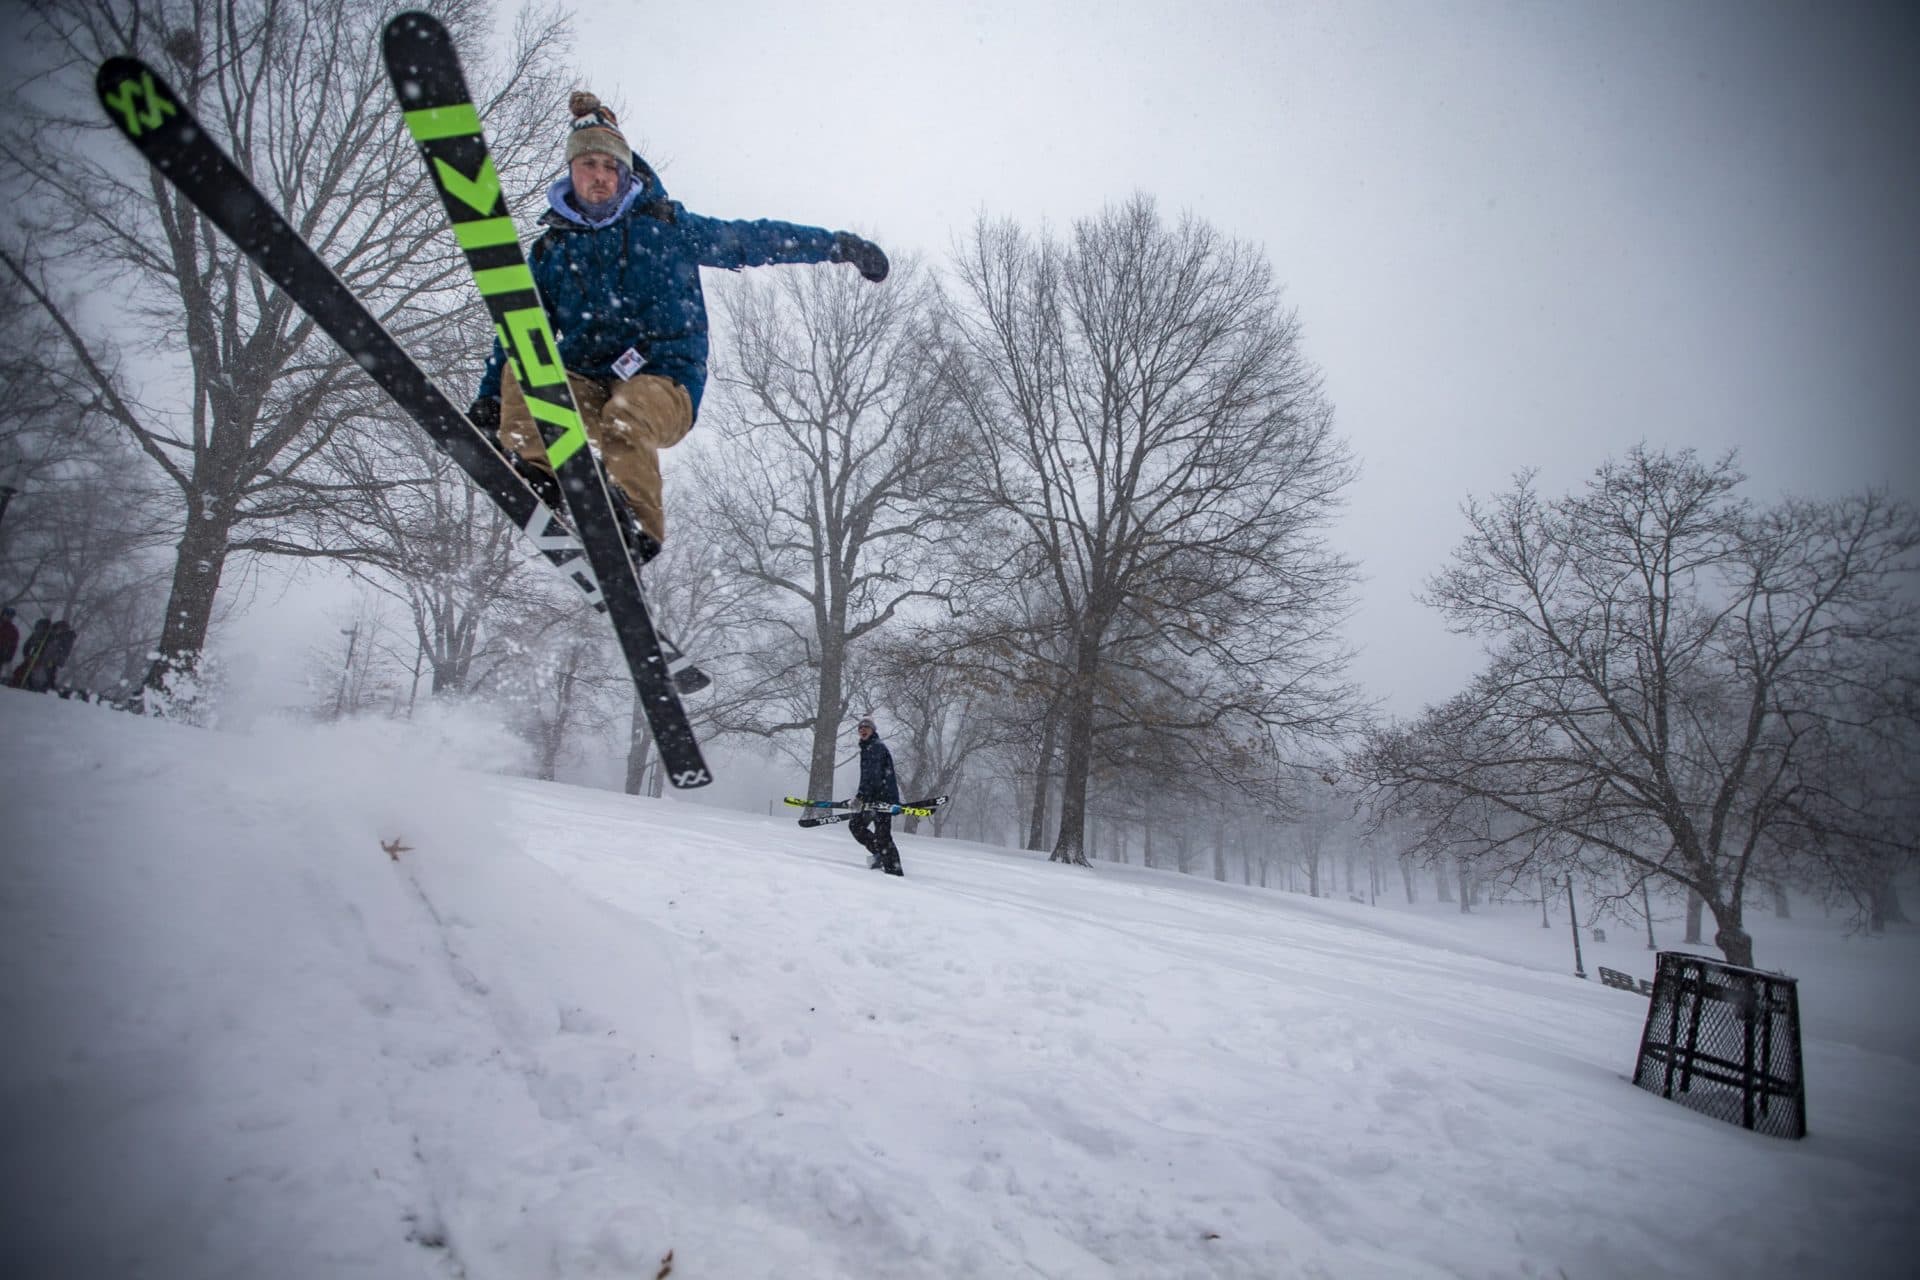 Kevin Moore attempts a 360 degree spin as he ski jumps down the hill of the Soldier’s and Sailor’s Monument in the Boston Common. (Jesse Costa/WBUR)